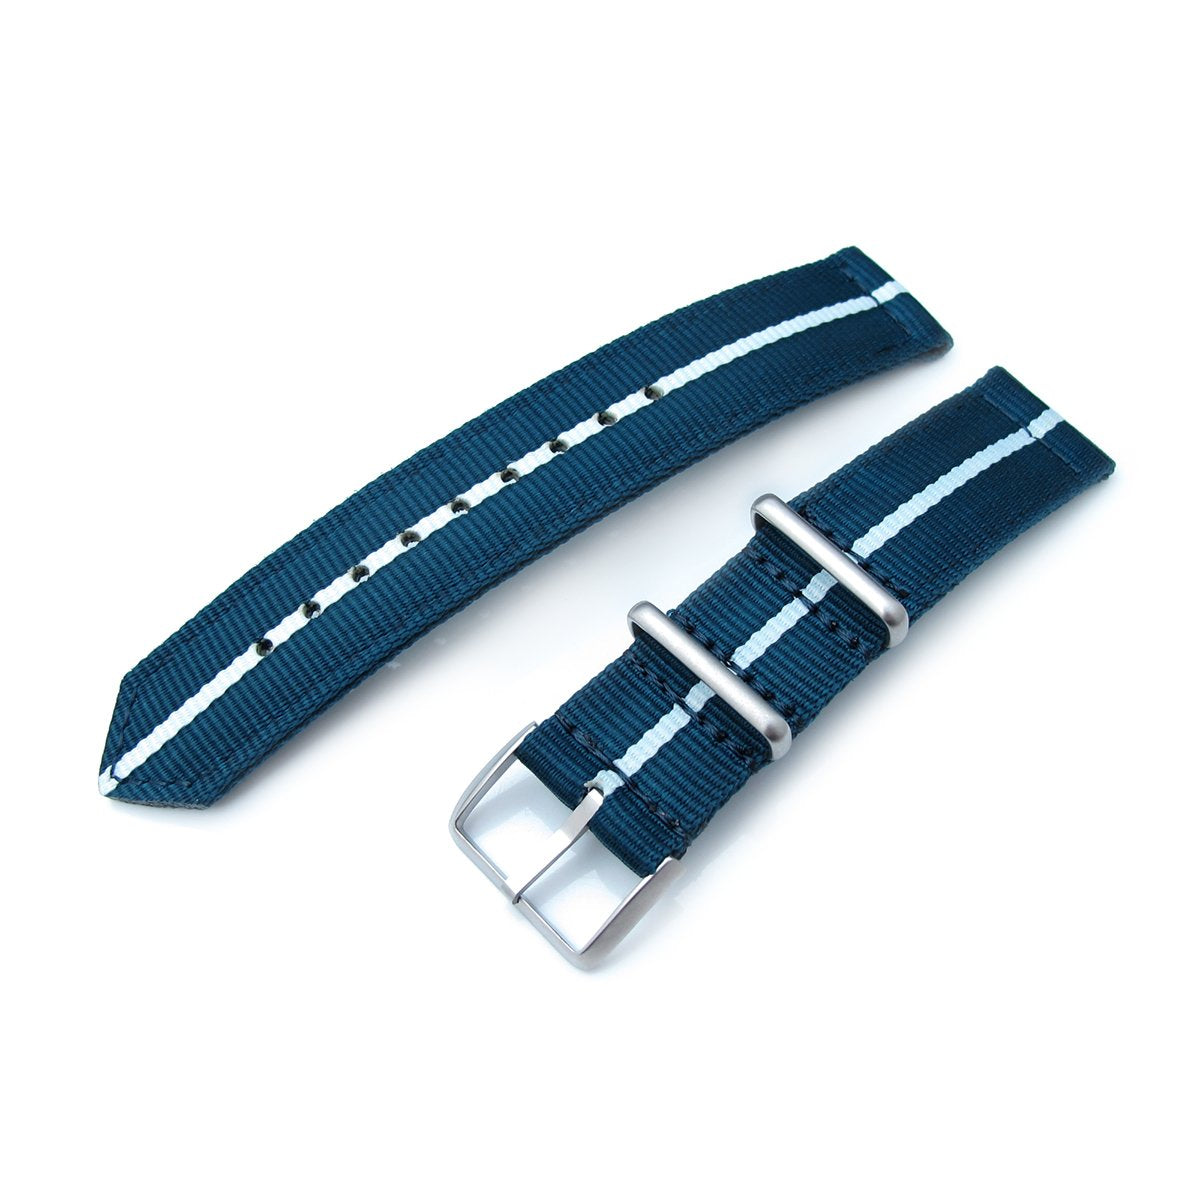 20mm Two Piece WW2 G10 Nylon Navy Blue & White Brushed Buckle Strapcode Watch Bands